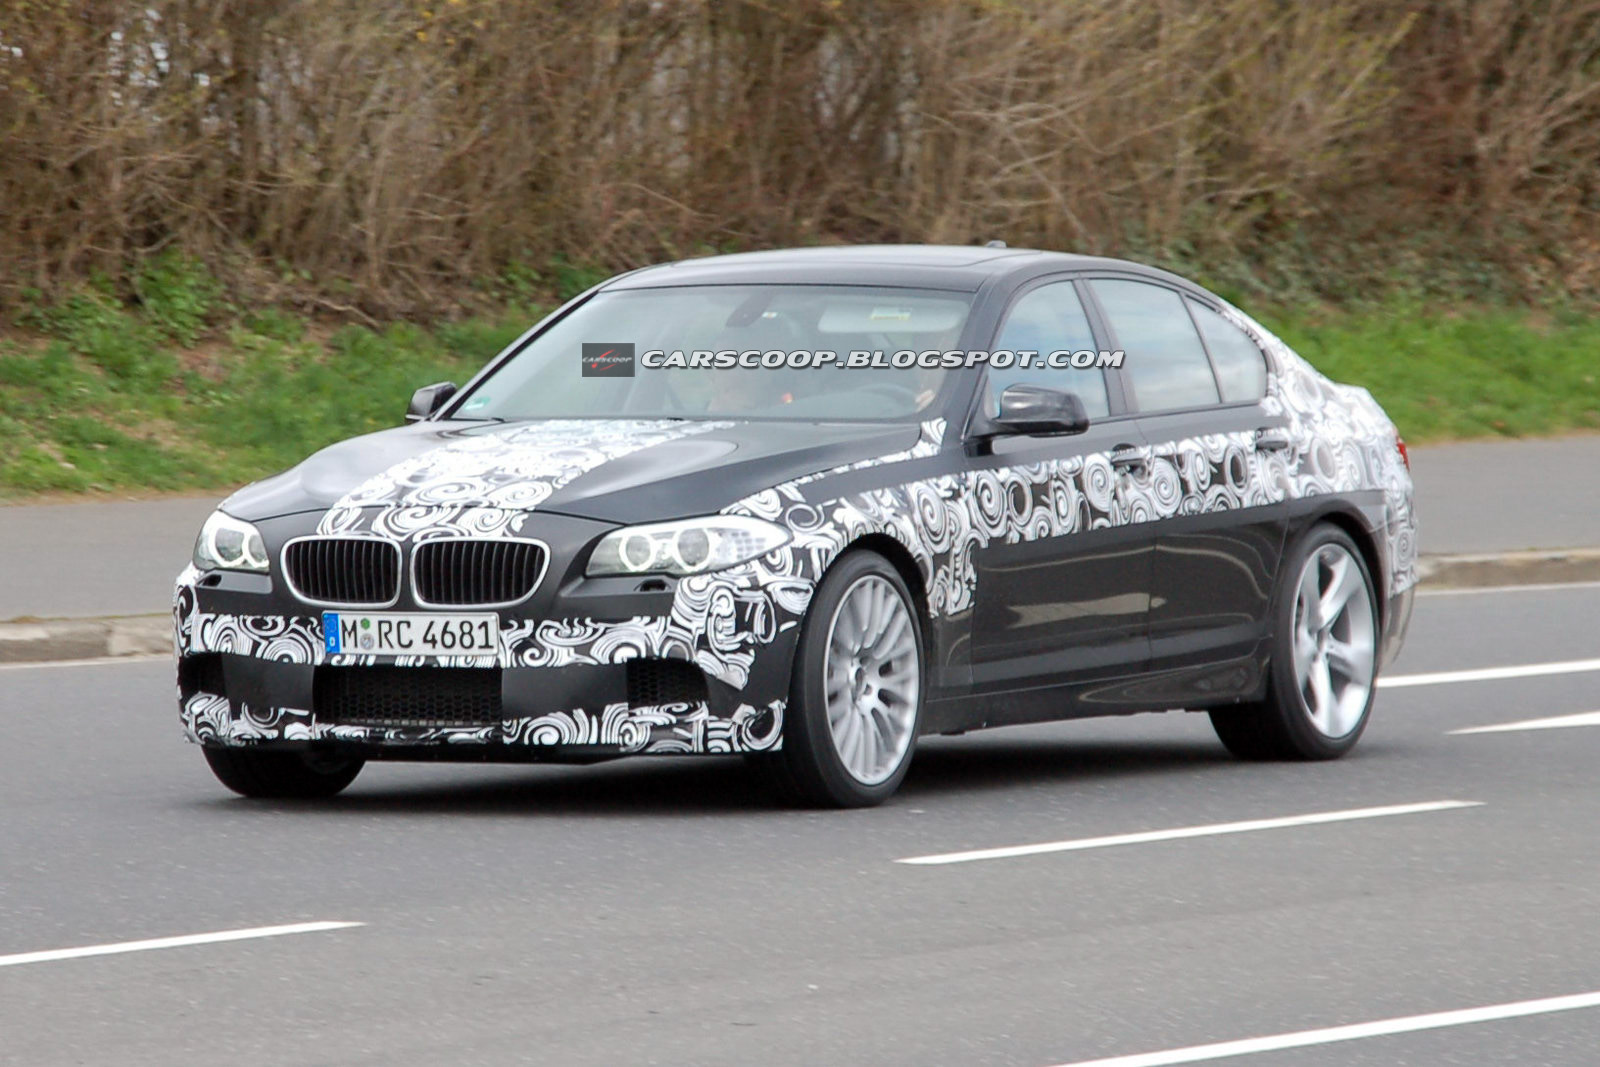 More spyshots of the F10 BMW